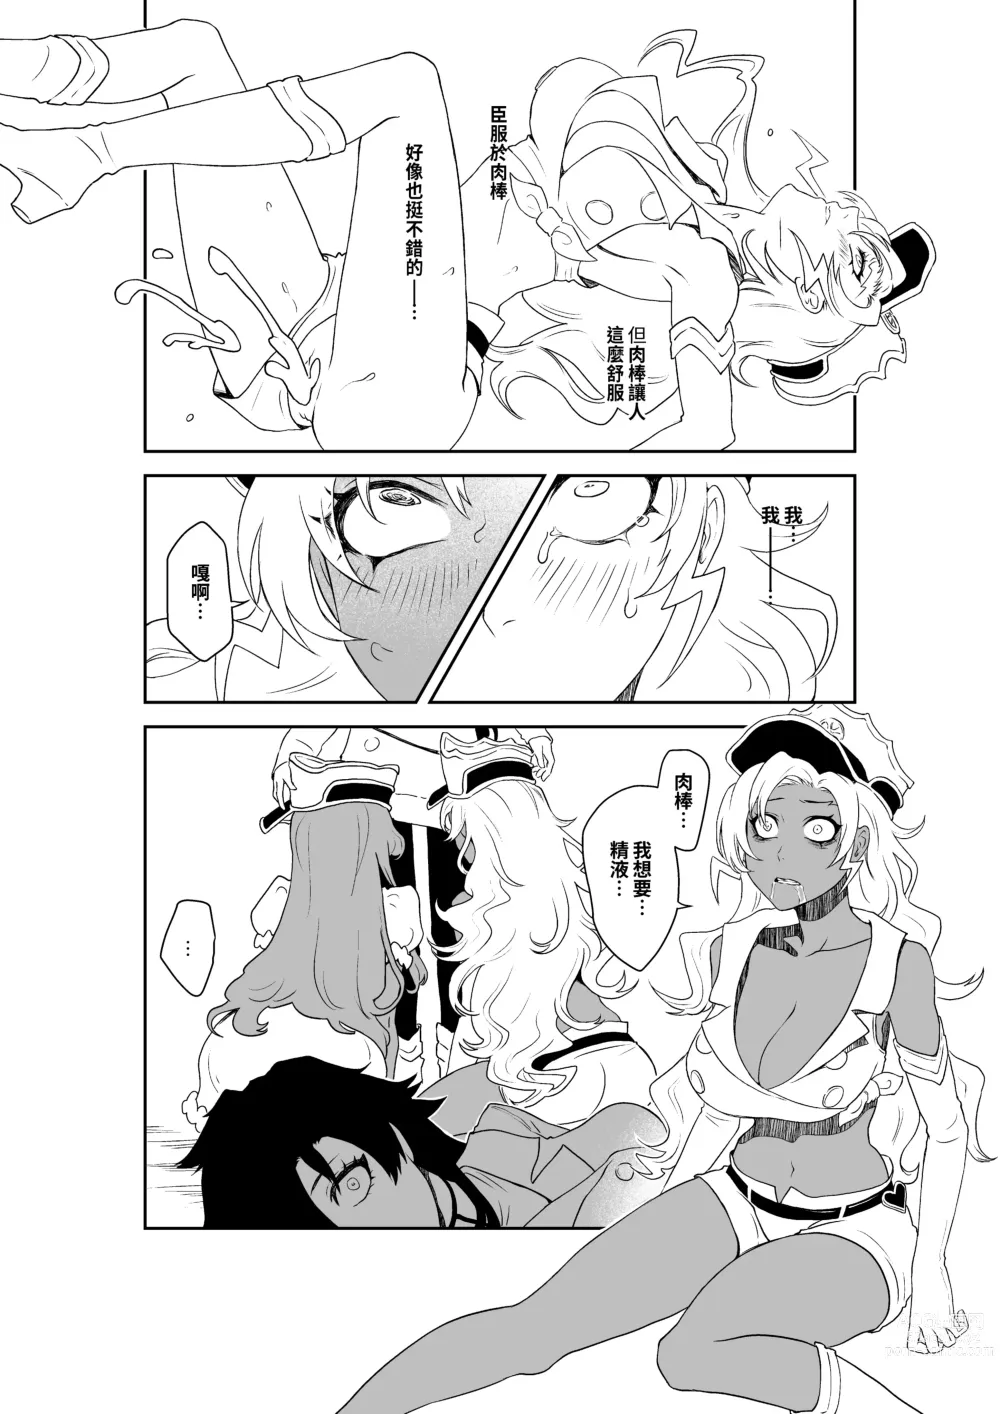 Page 10 of doujinshi Grim Reaper (18P) Bambietta/Candice Ft. Giselle Smelly Semen